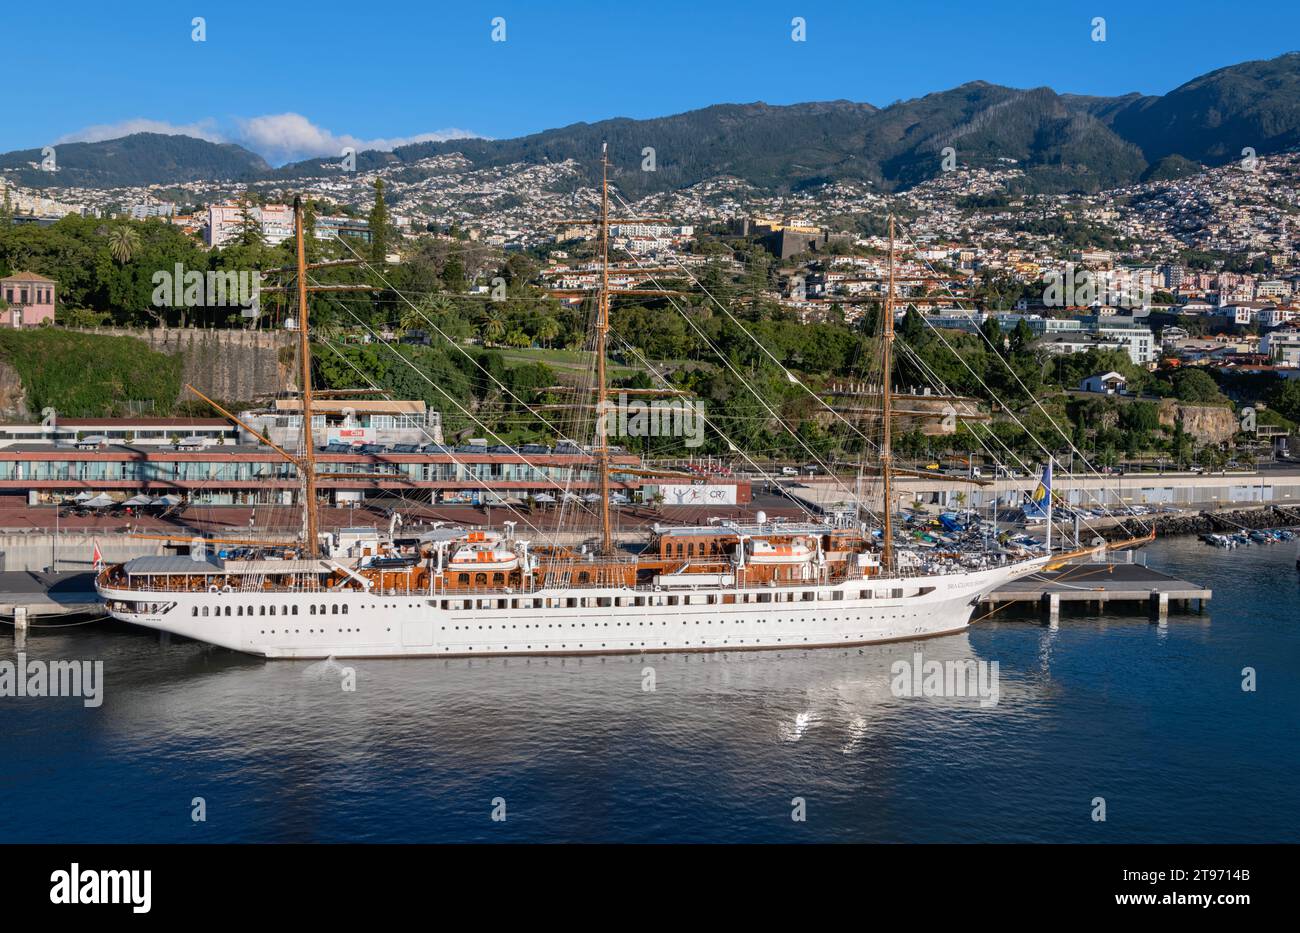 Sea Cloud Spirit 3 masted luxury yacht at Port of Funchal Madeira Portugal Stock Photo